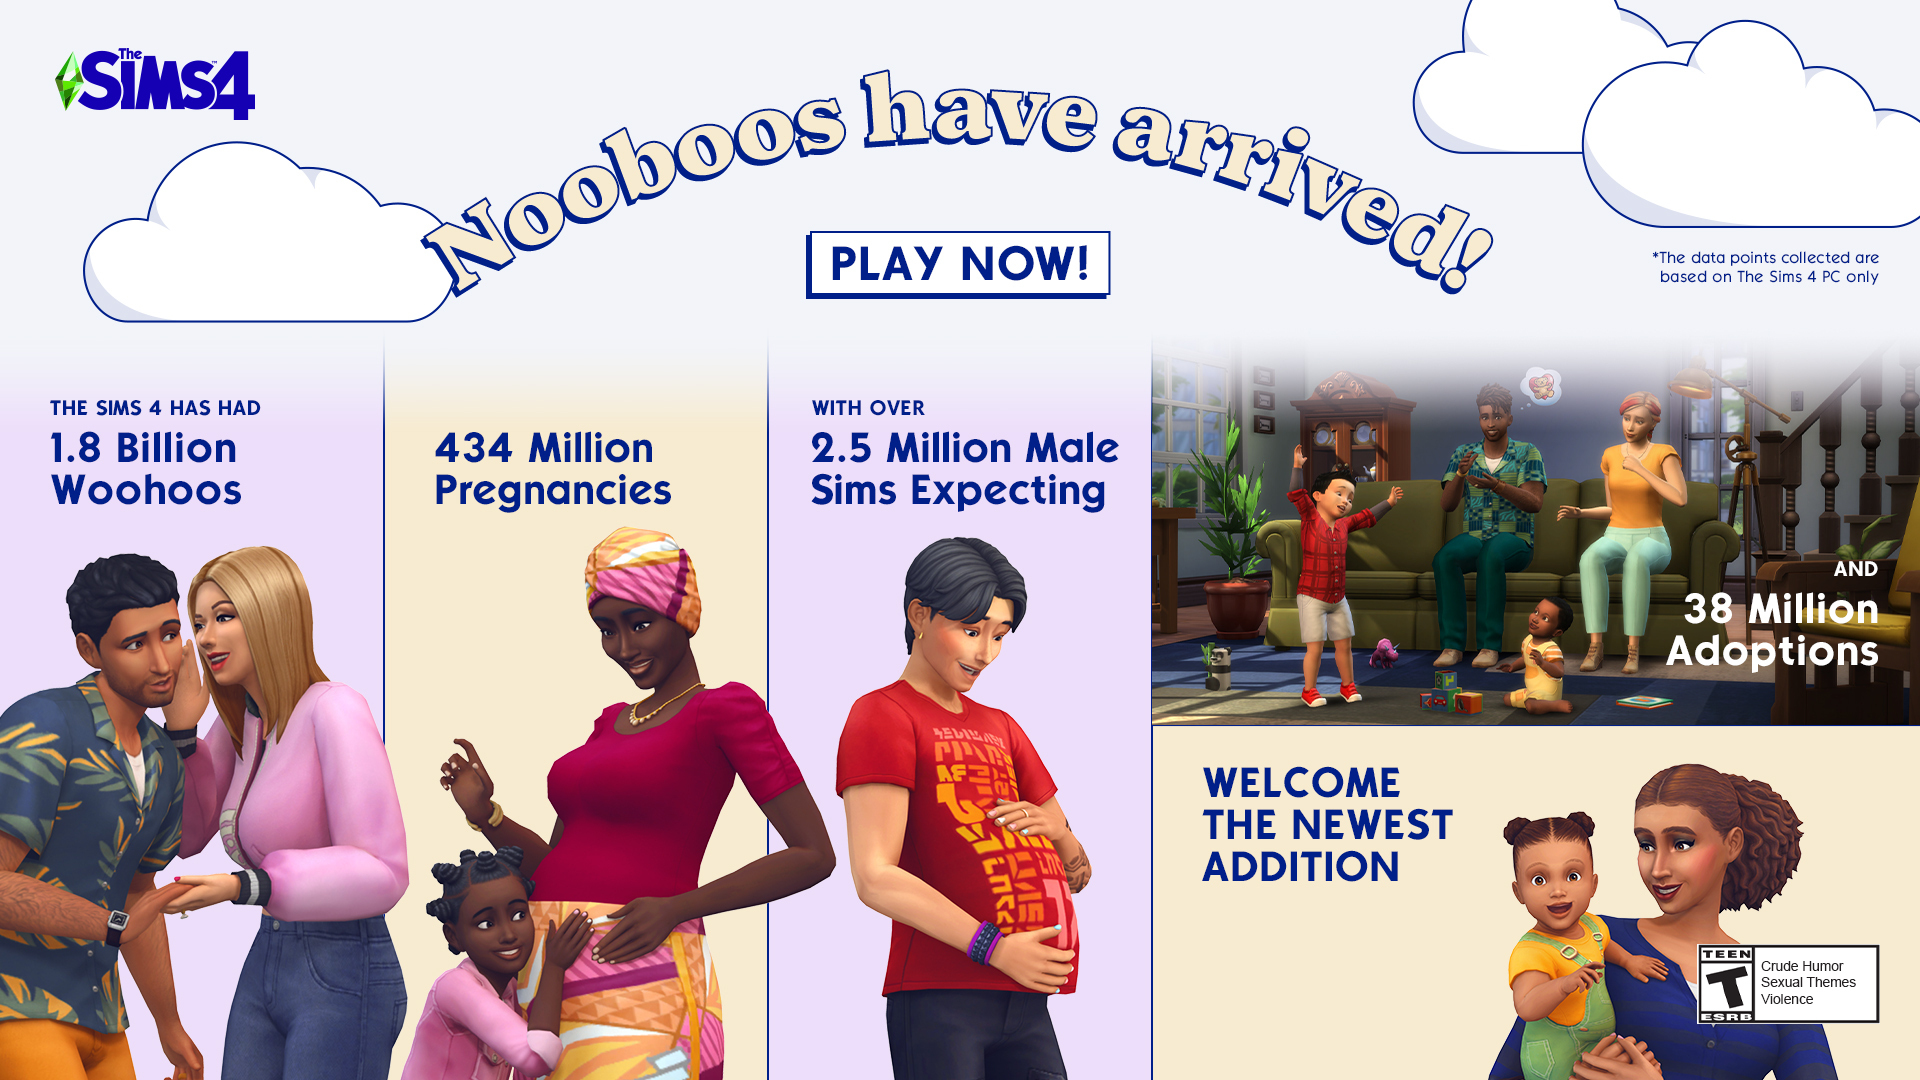 The Sims 4 Latest Update And DLC Allow You To Fully Customize Babies -  GameSpot